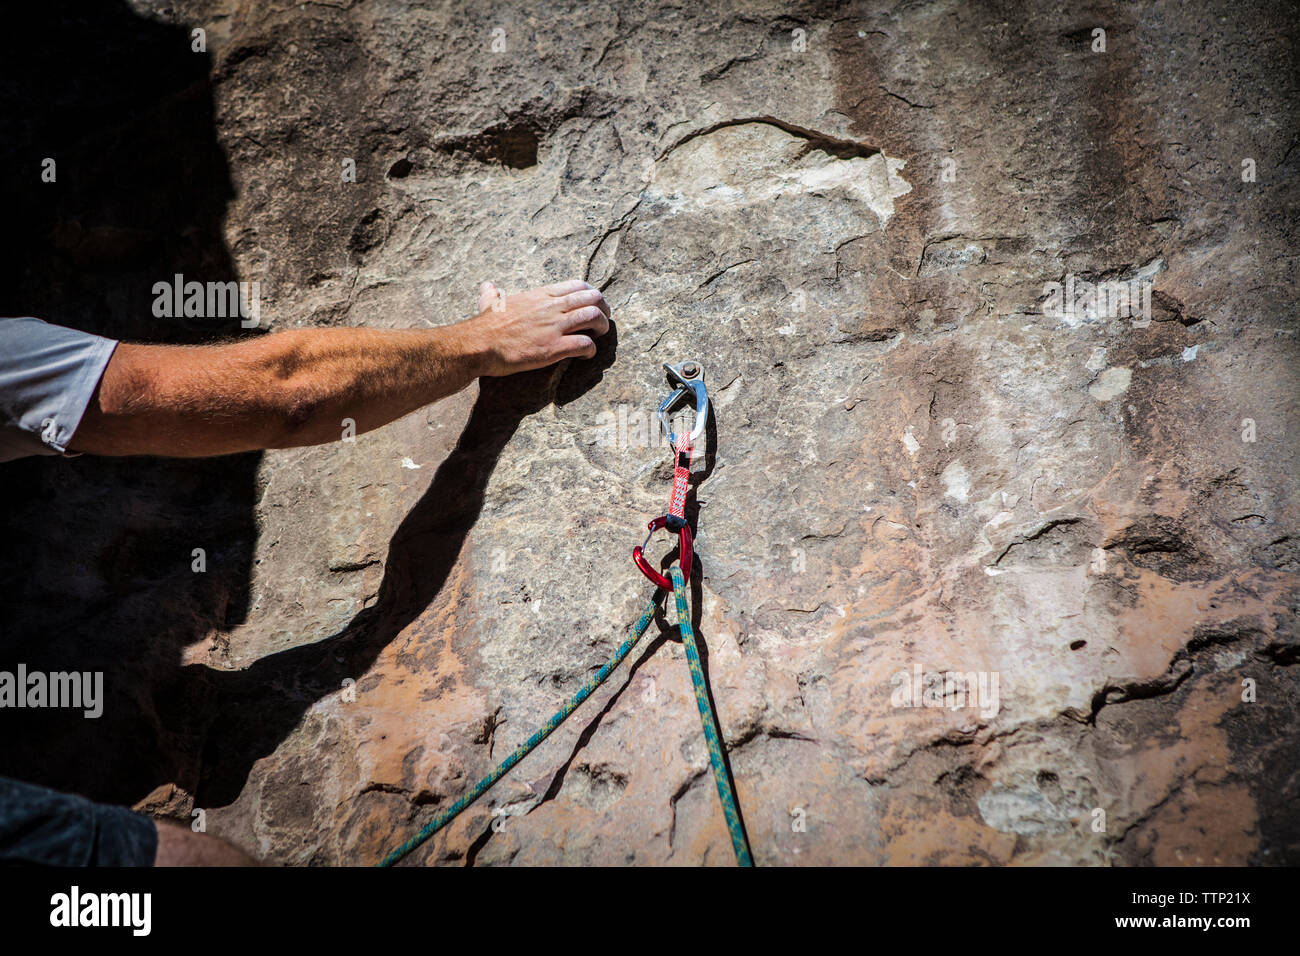 Cropped image of hand gripping while rock climbing Stock Photo